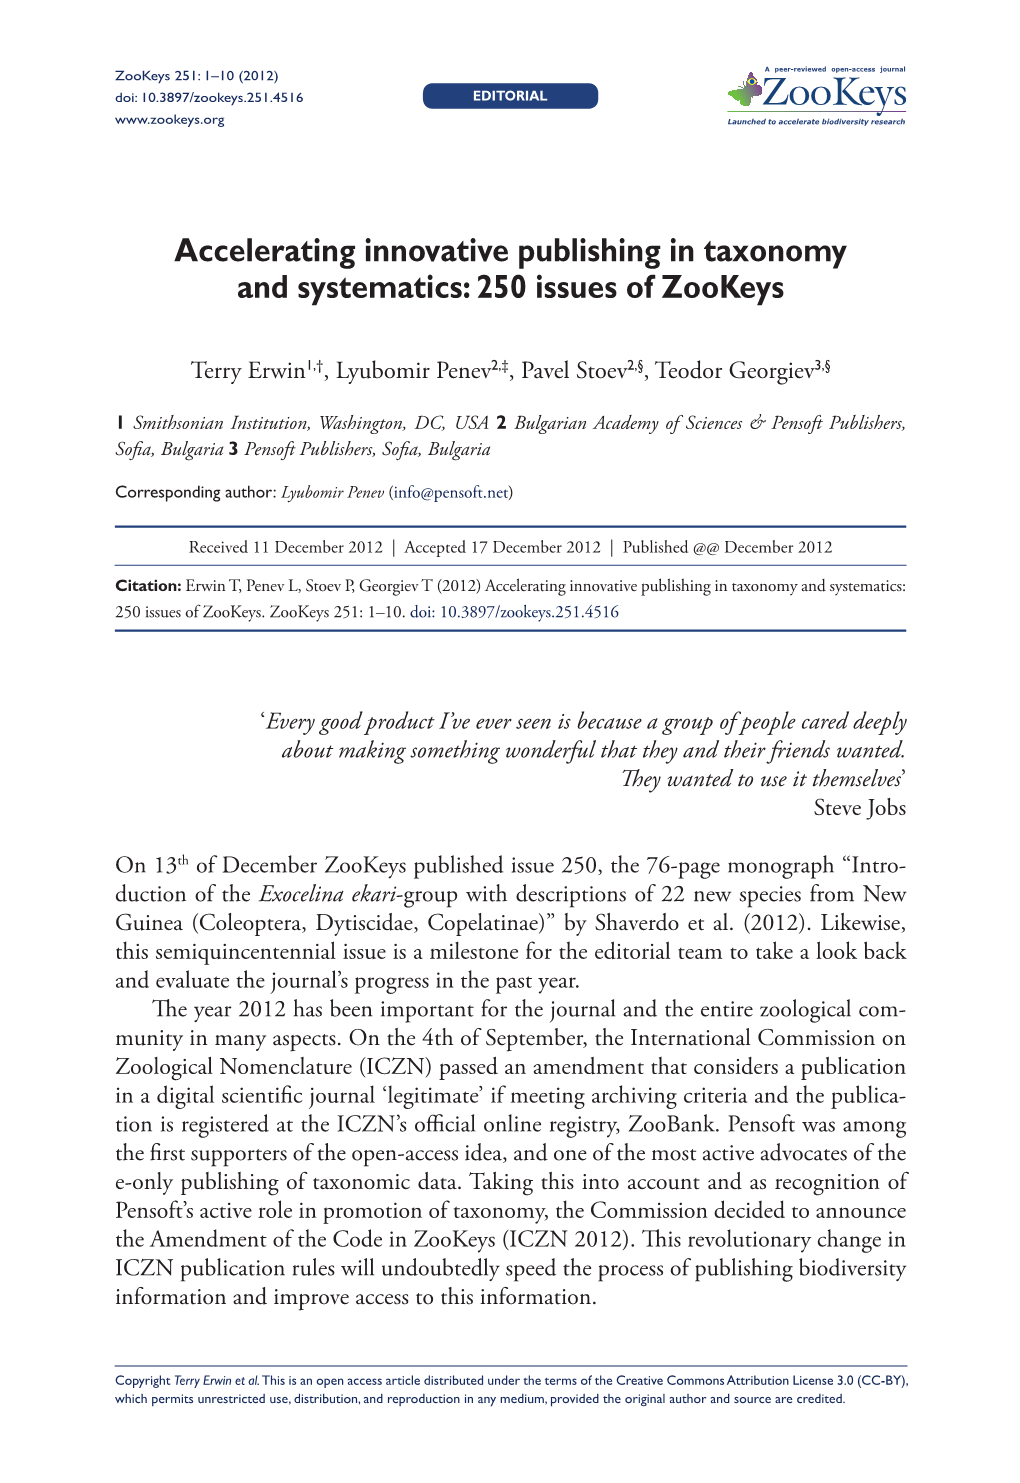 Accelerating Innovative Publishing in Taxonomy and Systematics: 250 Issues of Zookeys